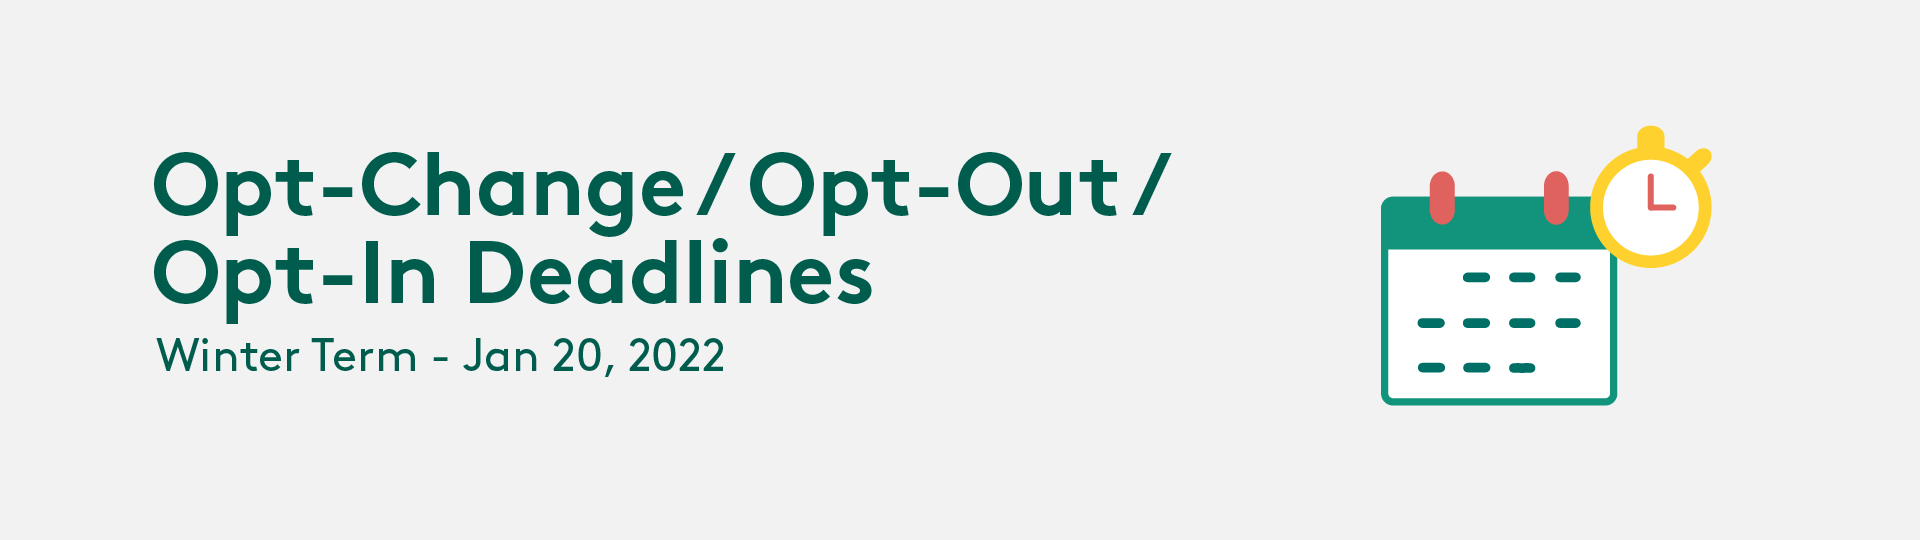 Opt-Change/Opt-Out/Opt-In Deadlines